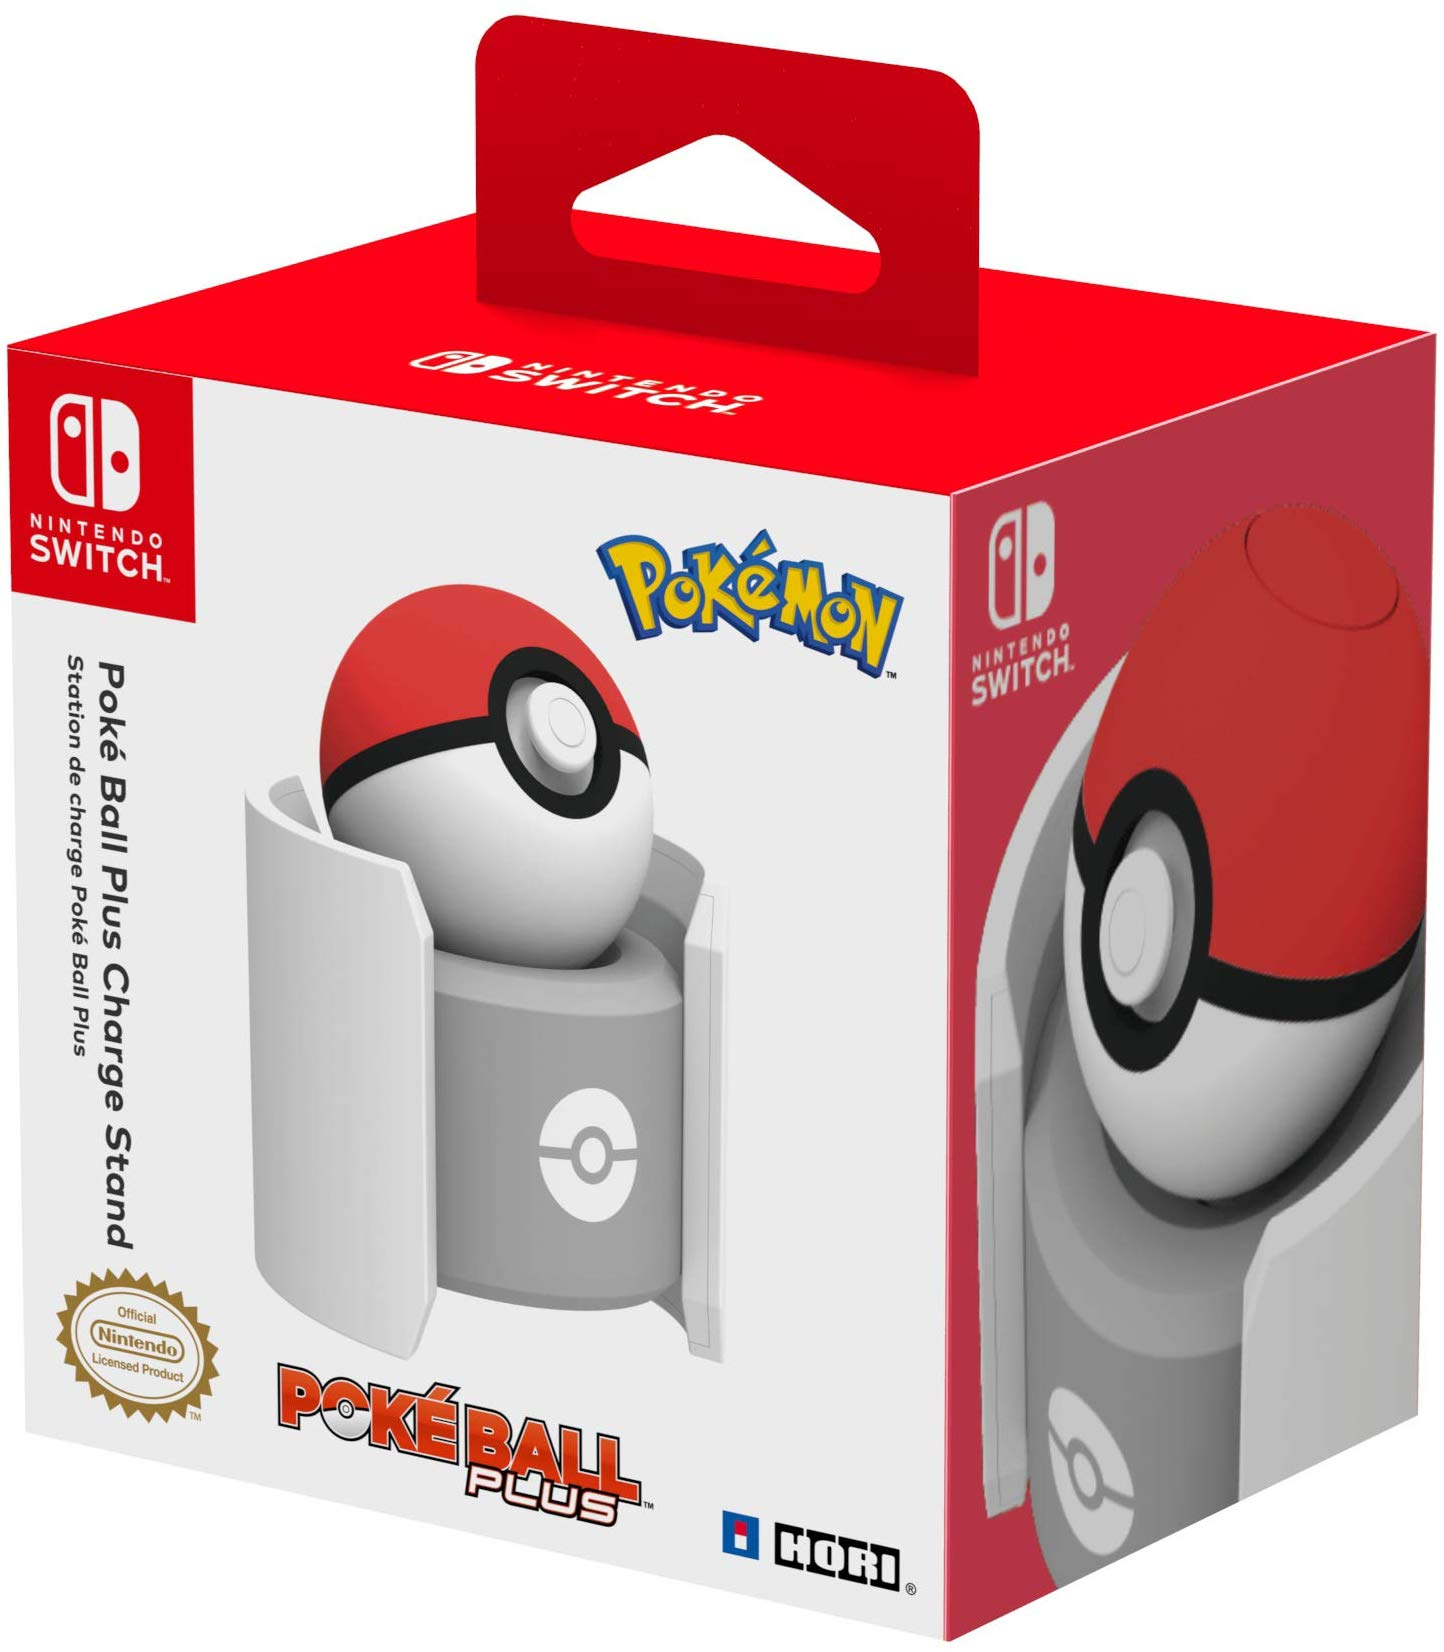 "Every great Trainer needs a Poké Ball to catch and store their Pokémon.  With Poké Ball™ Plus, you can bring your Pokémon adventure into the real world with an accessory that fits in the palm of your hand."<br><br>Is what Nintendo says.<br><br>Kids these days, huh? Grab a stand for your pokeball, if you want, <a href="https://amzn.to/2yxIHxL" target="_blank" "nofollow">here</a>.